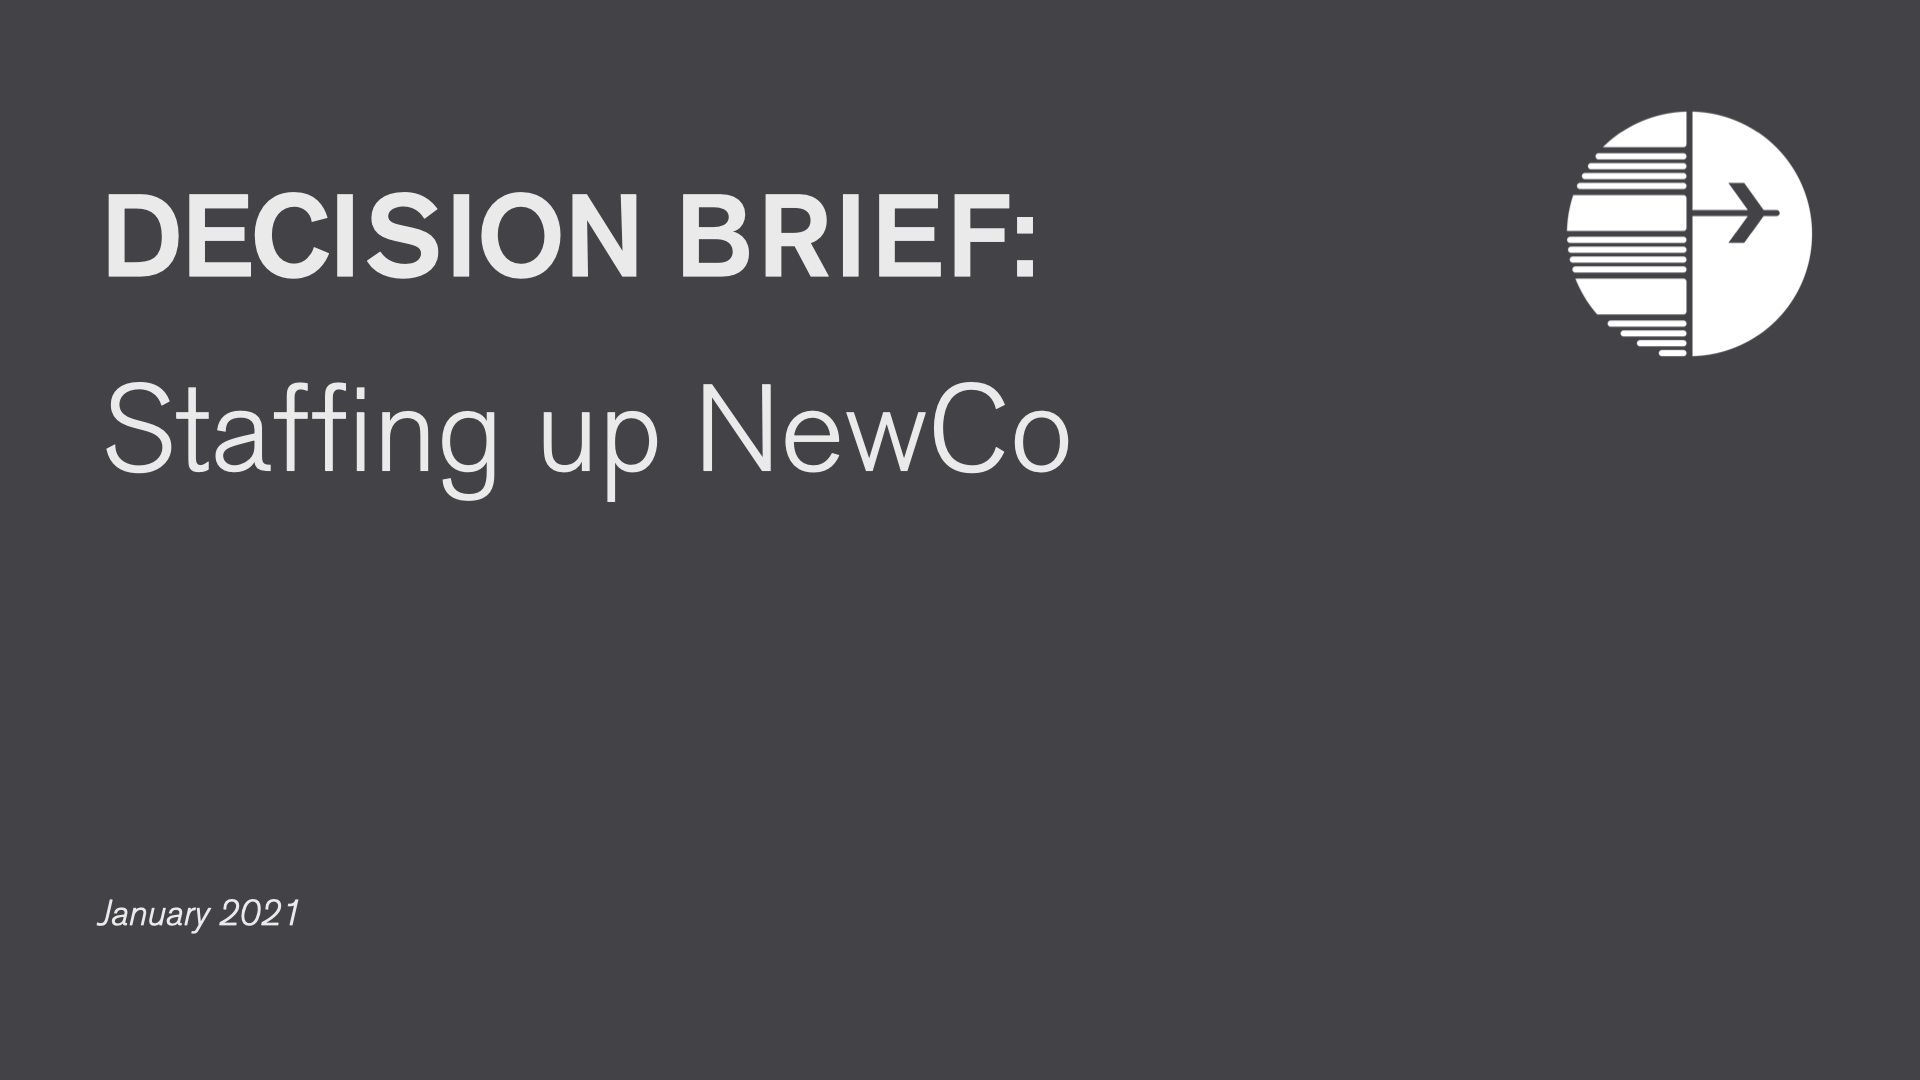 DECISION BRIEF: Staffing Up NewCo